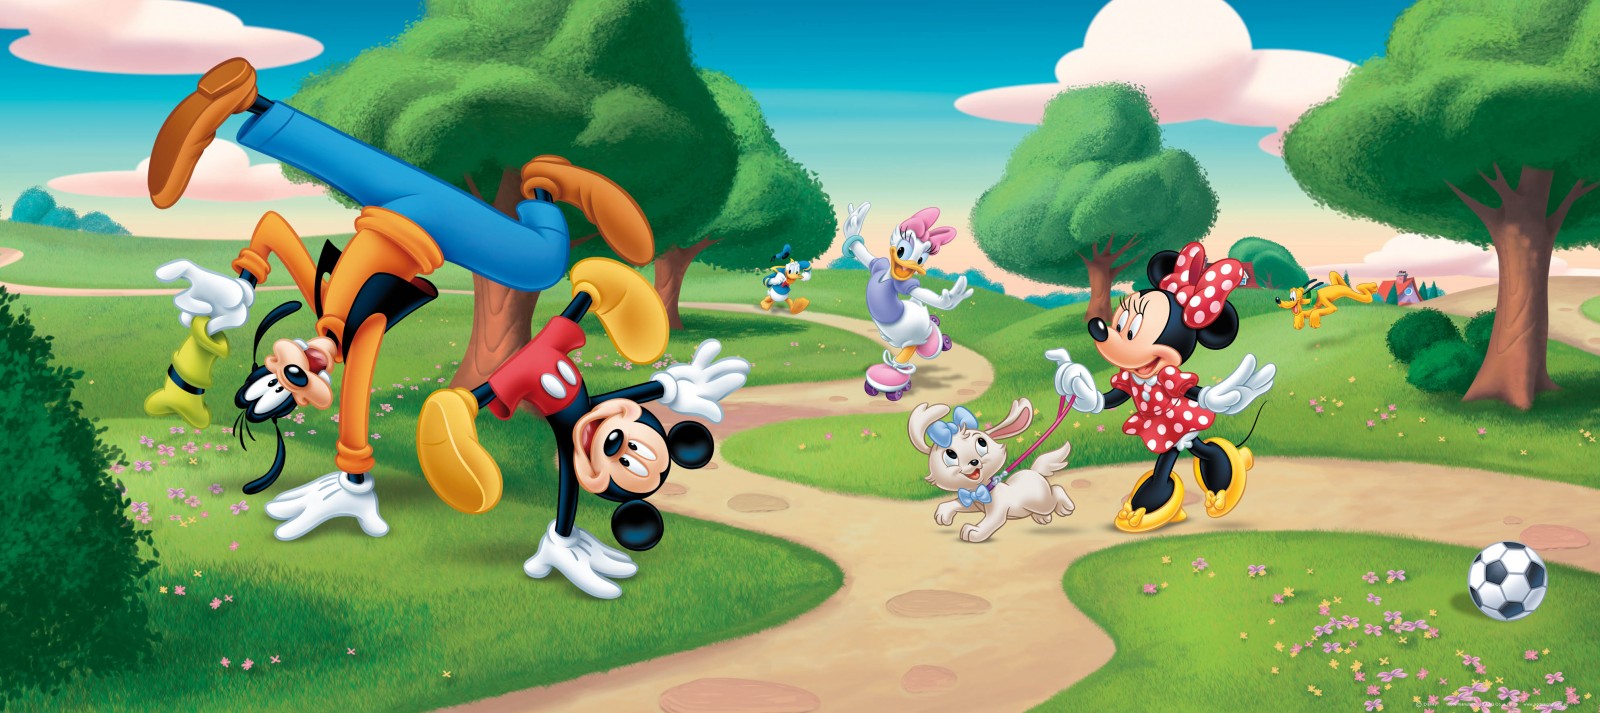 Wall Mural Wallpaper Disney Mickey Mouse Goofy Minnie Daisy At The